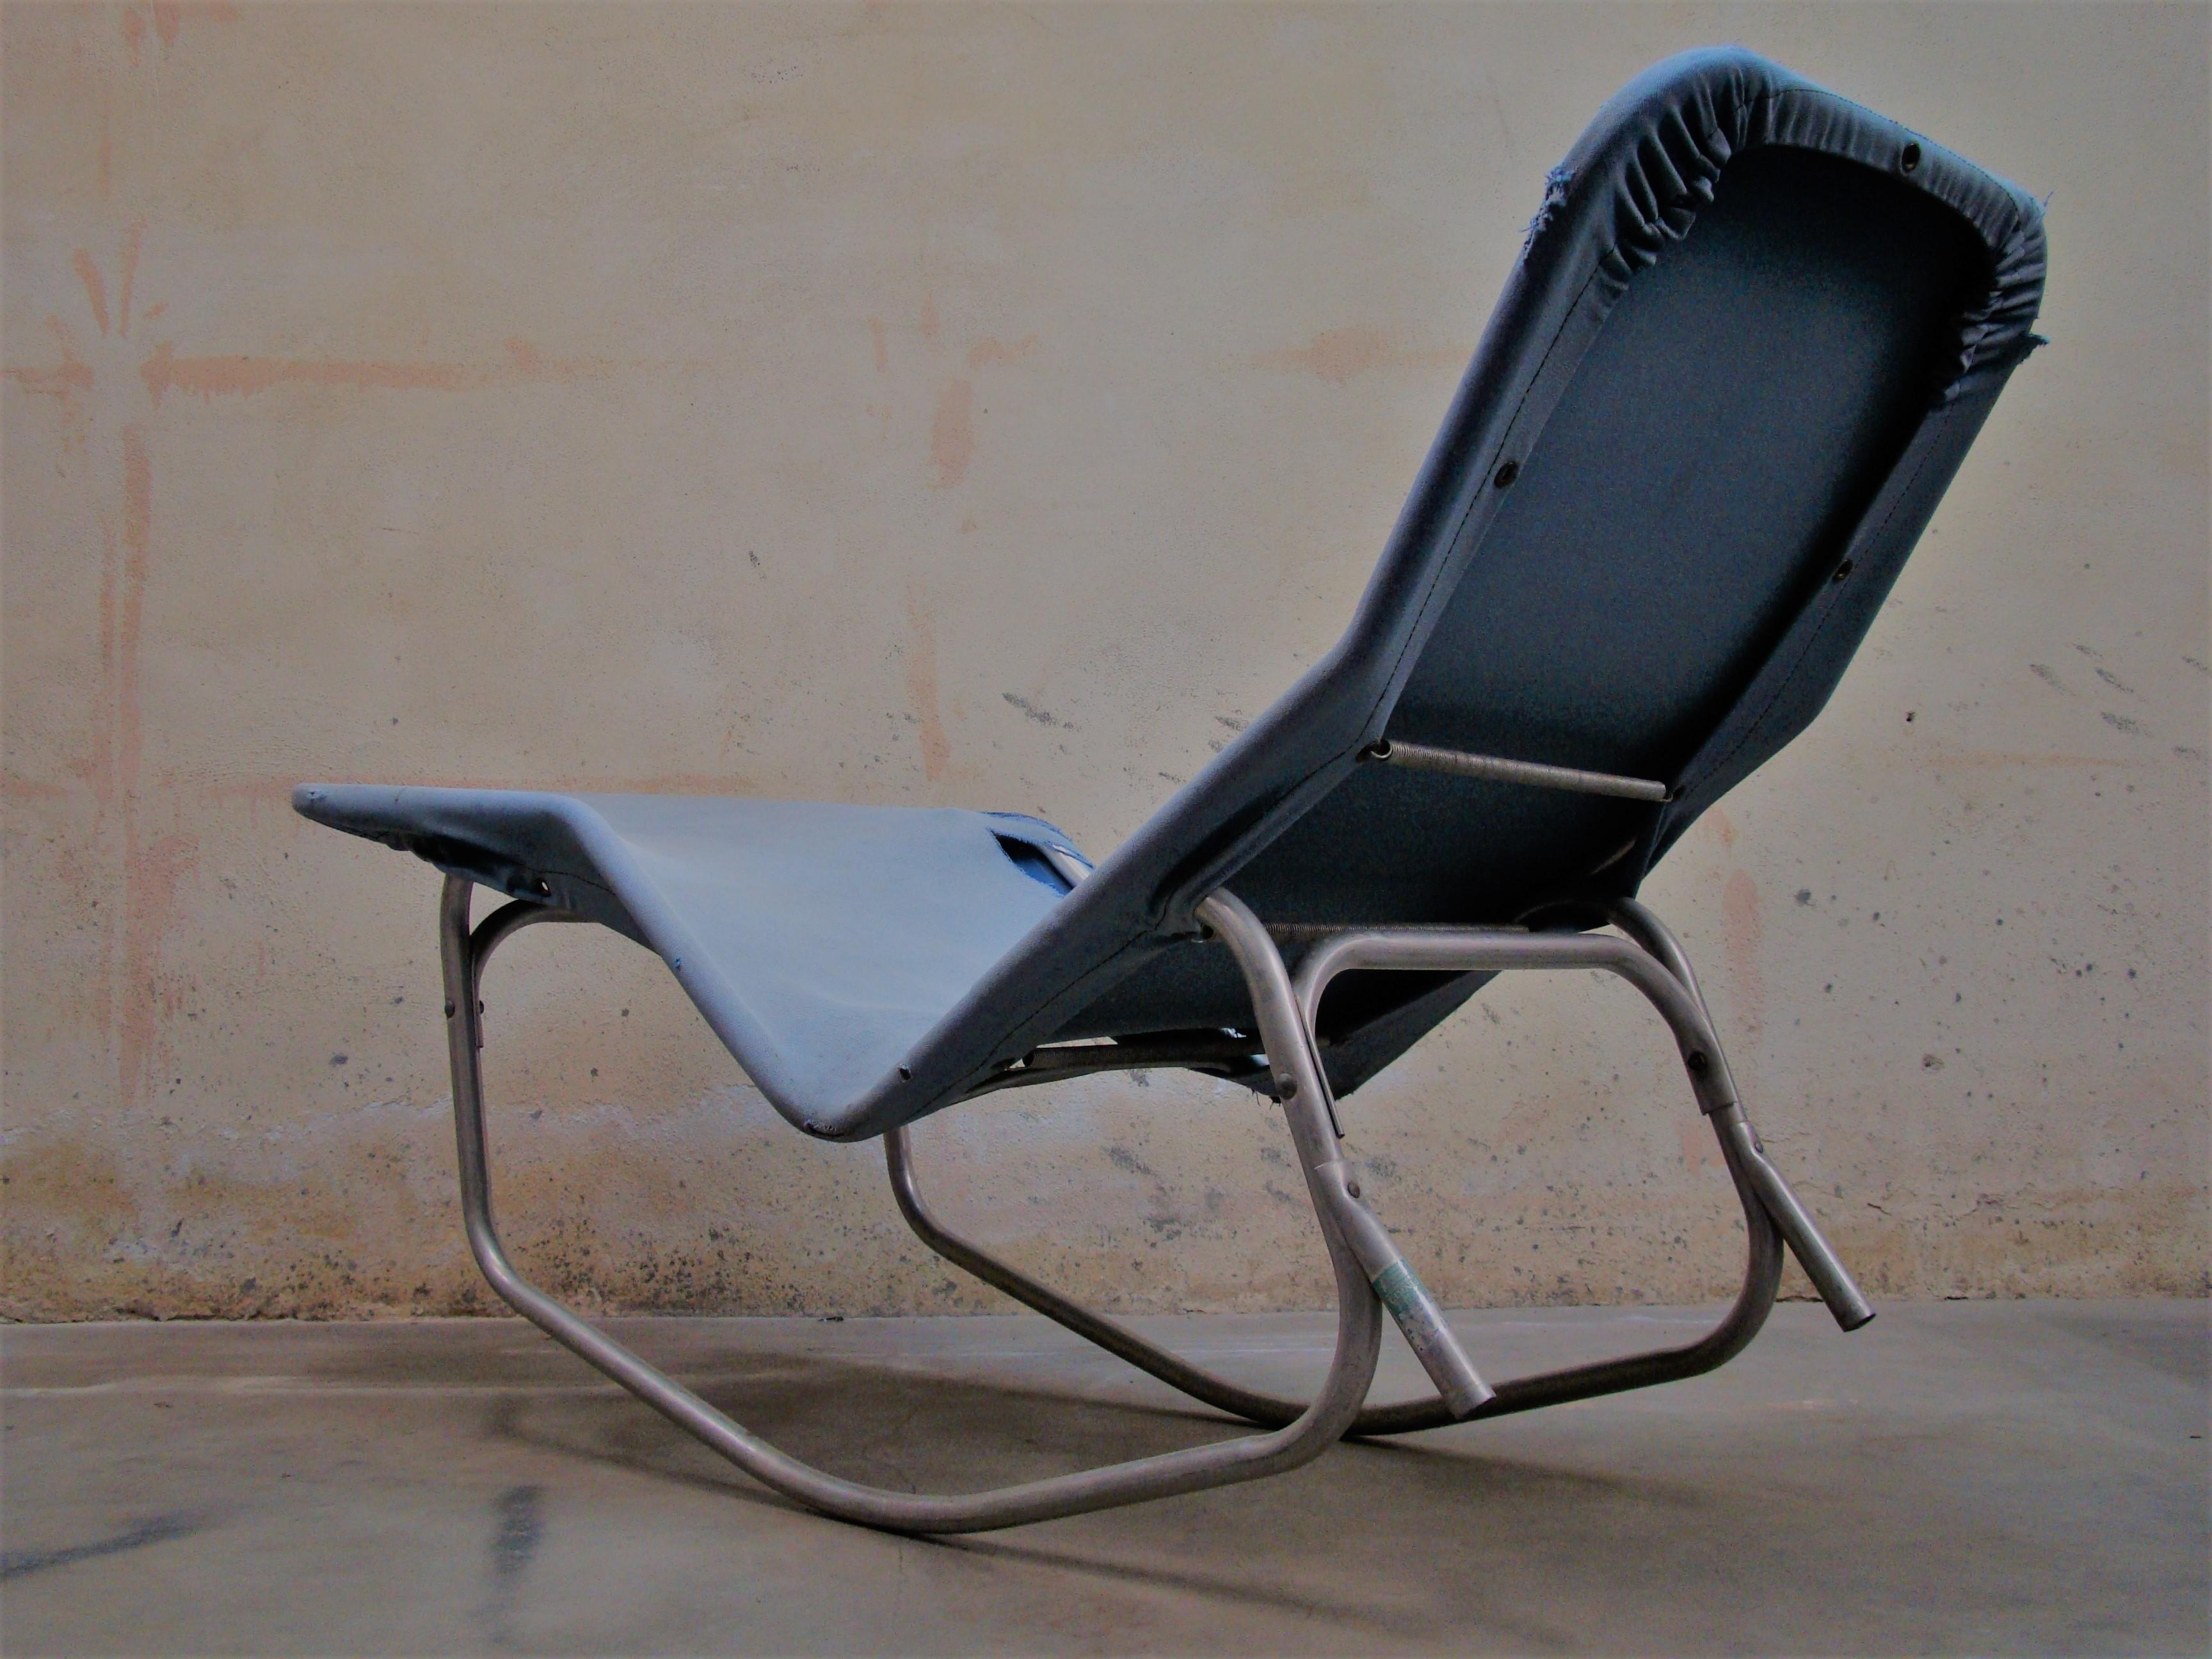 Barwa lounge chairs designed by Edgar Bartolucci and John Waldheim. Made of aluminium extruded tube with a blue canvas sling. The aluminium is weathered from being outside for their lifetime as they were intended, and the canvas is worn.